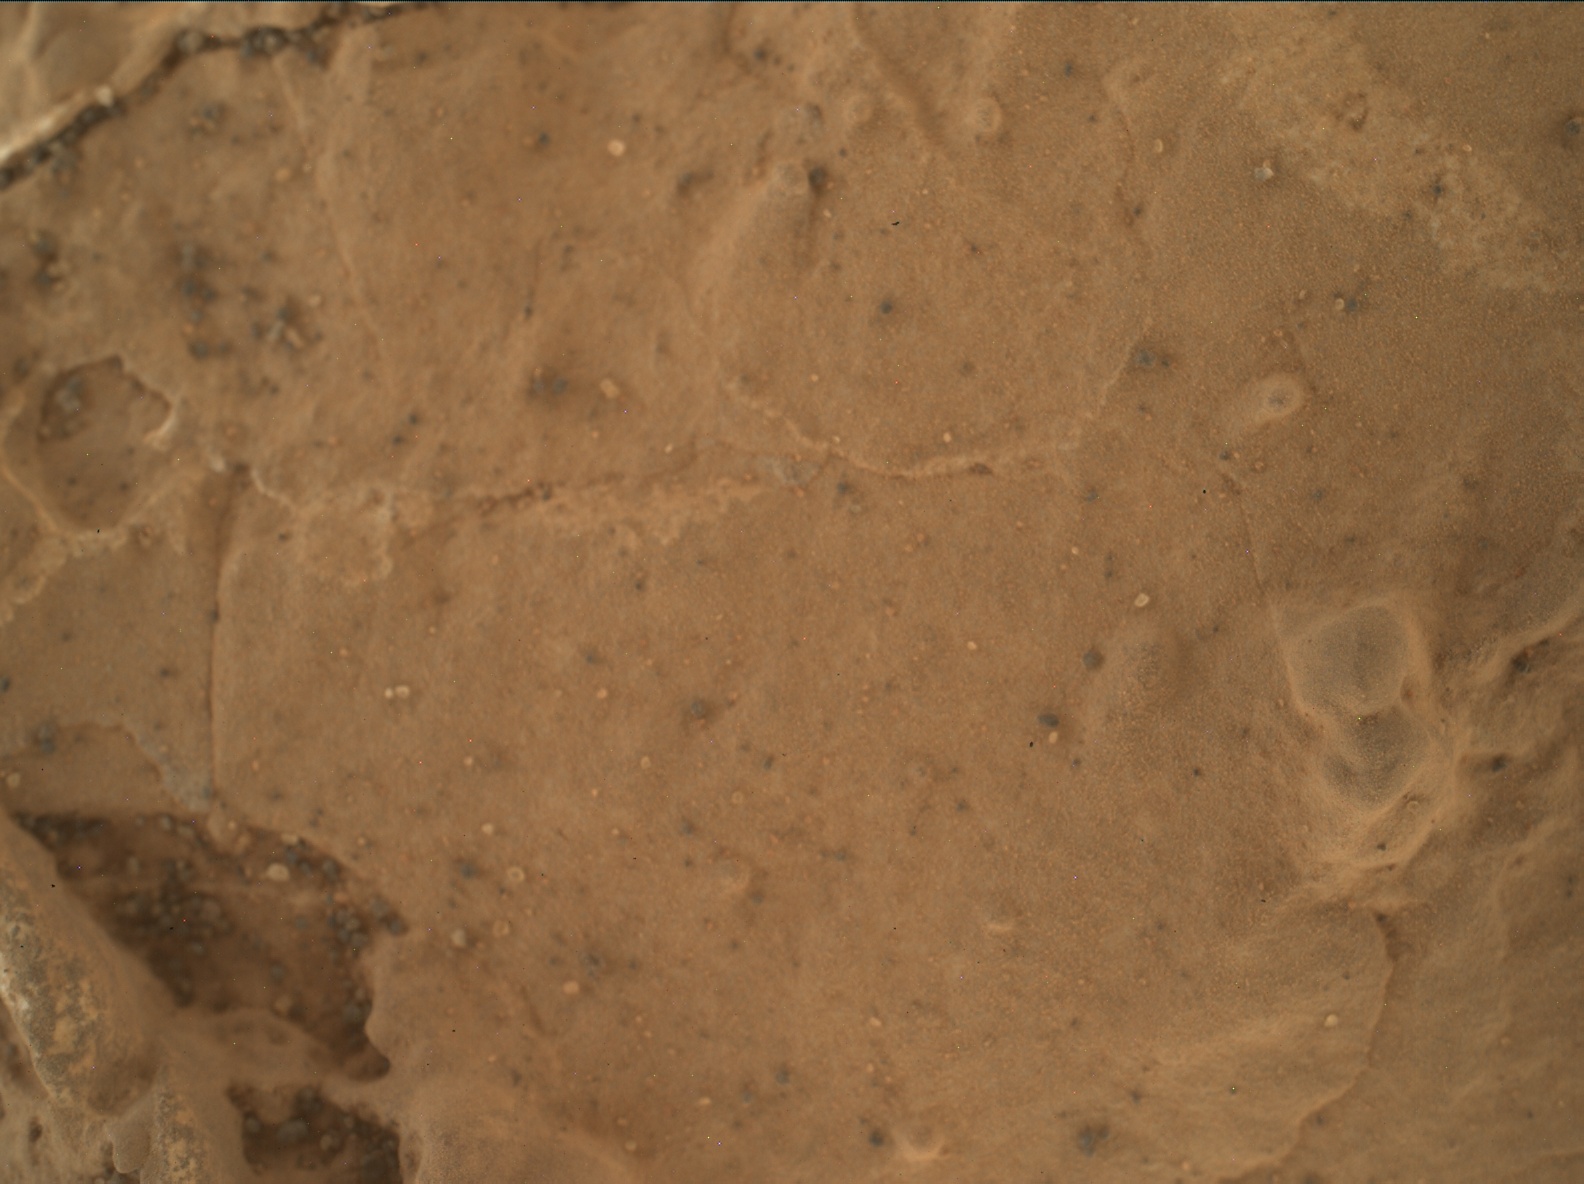 Nasa's Mars rover Curiosity acquired this image using its Mars Hand Lens Imager (MAHLI) on Sol 3044